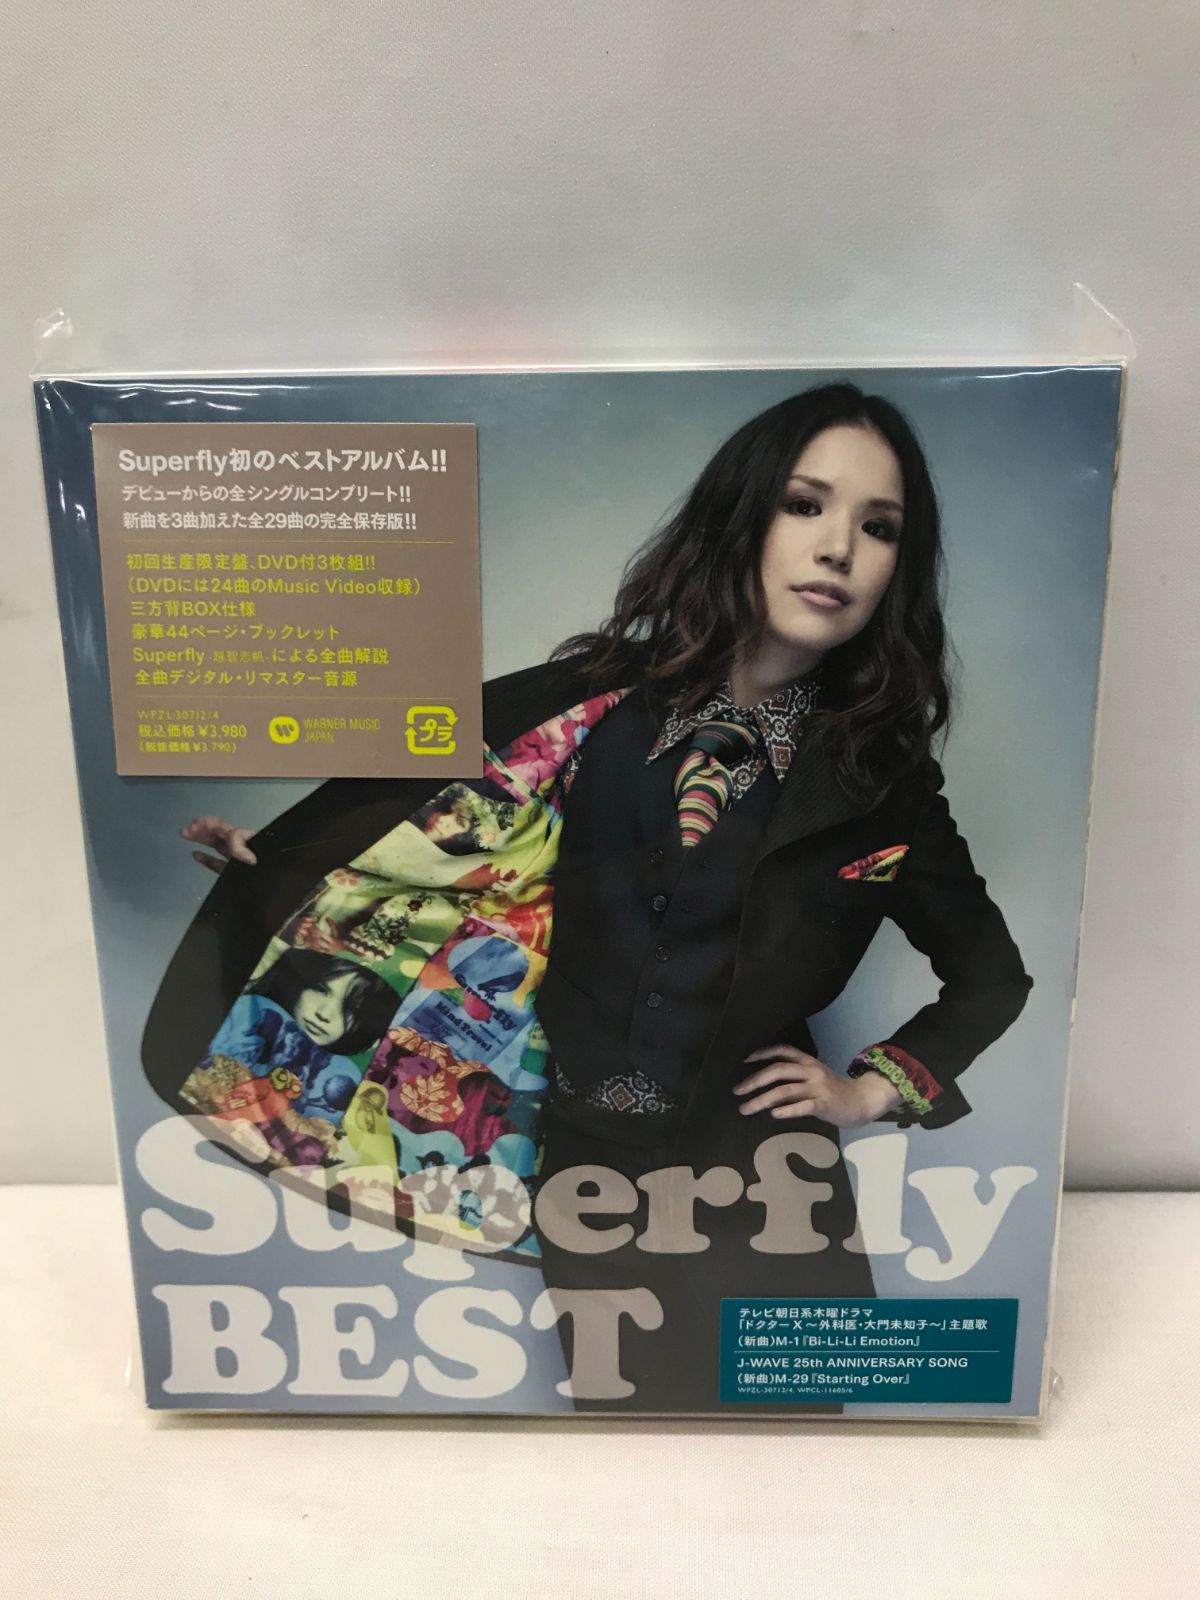 Superfly BEST (初回生産限定盤) Superfly